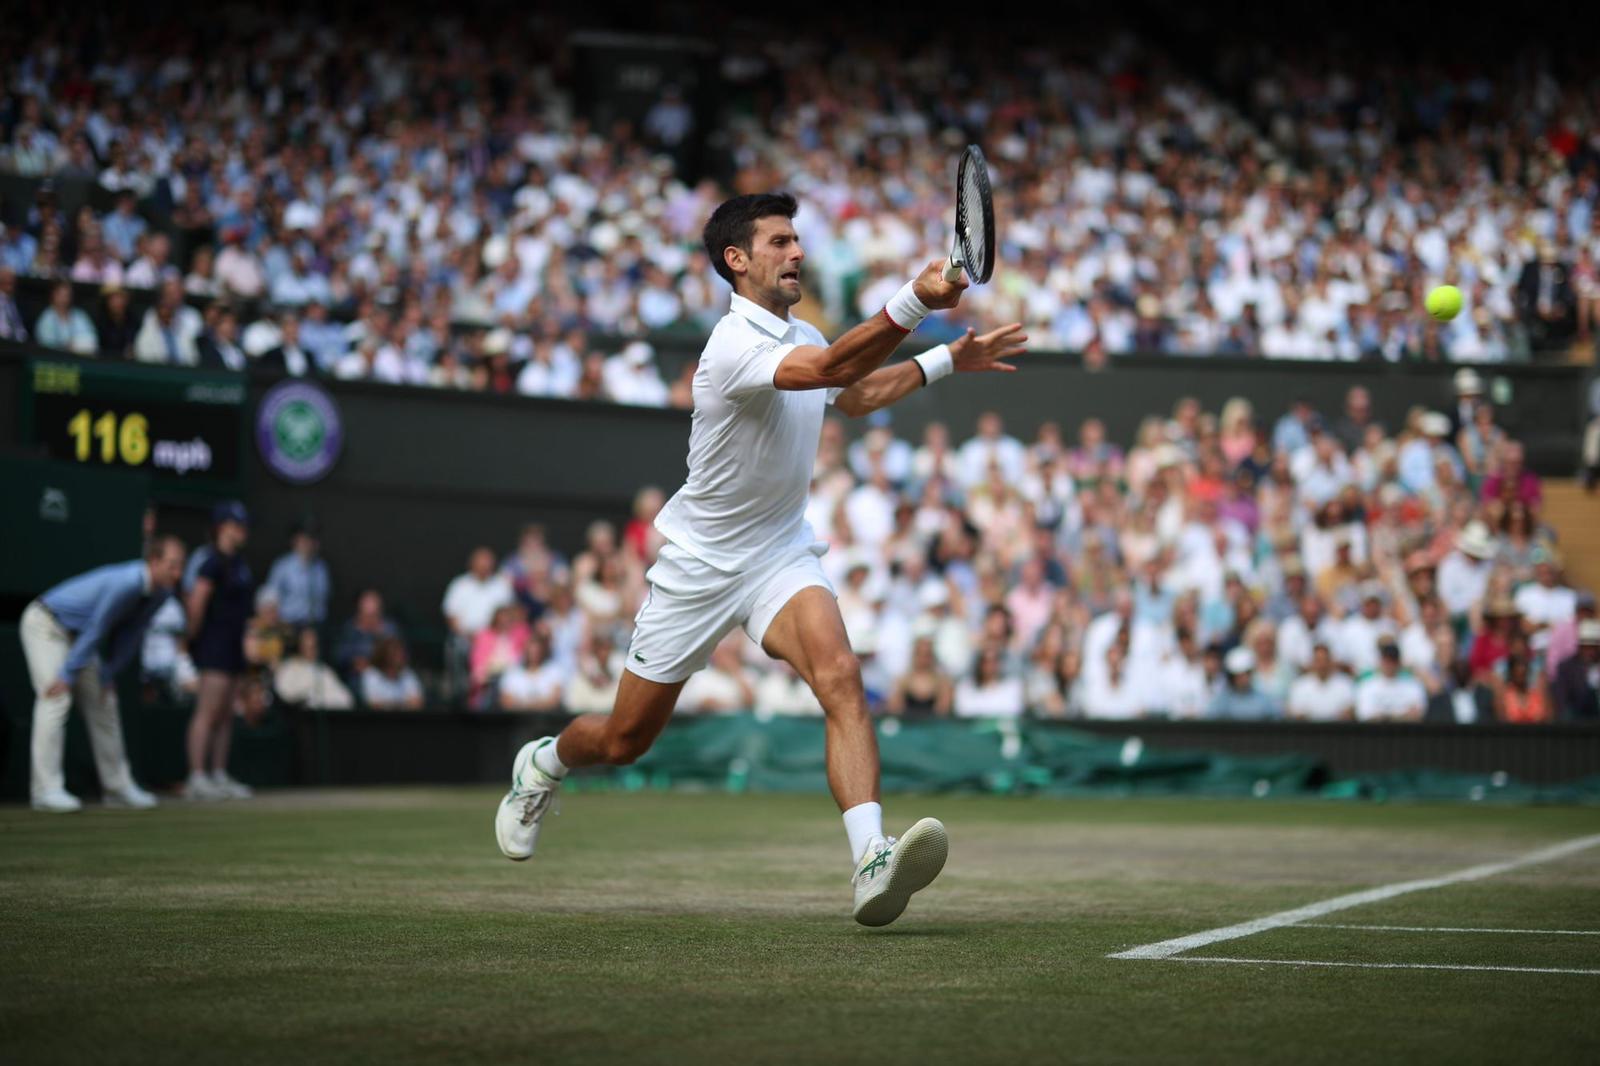 Tennis-Federer rebounds with win over Berrettini